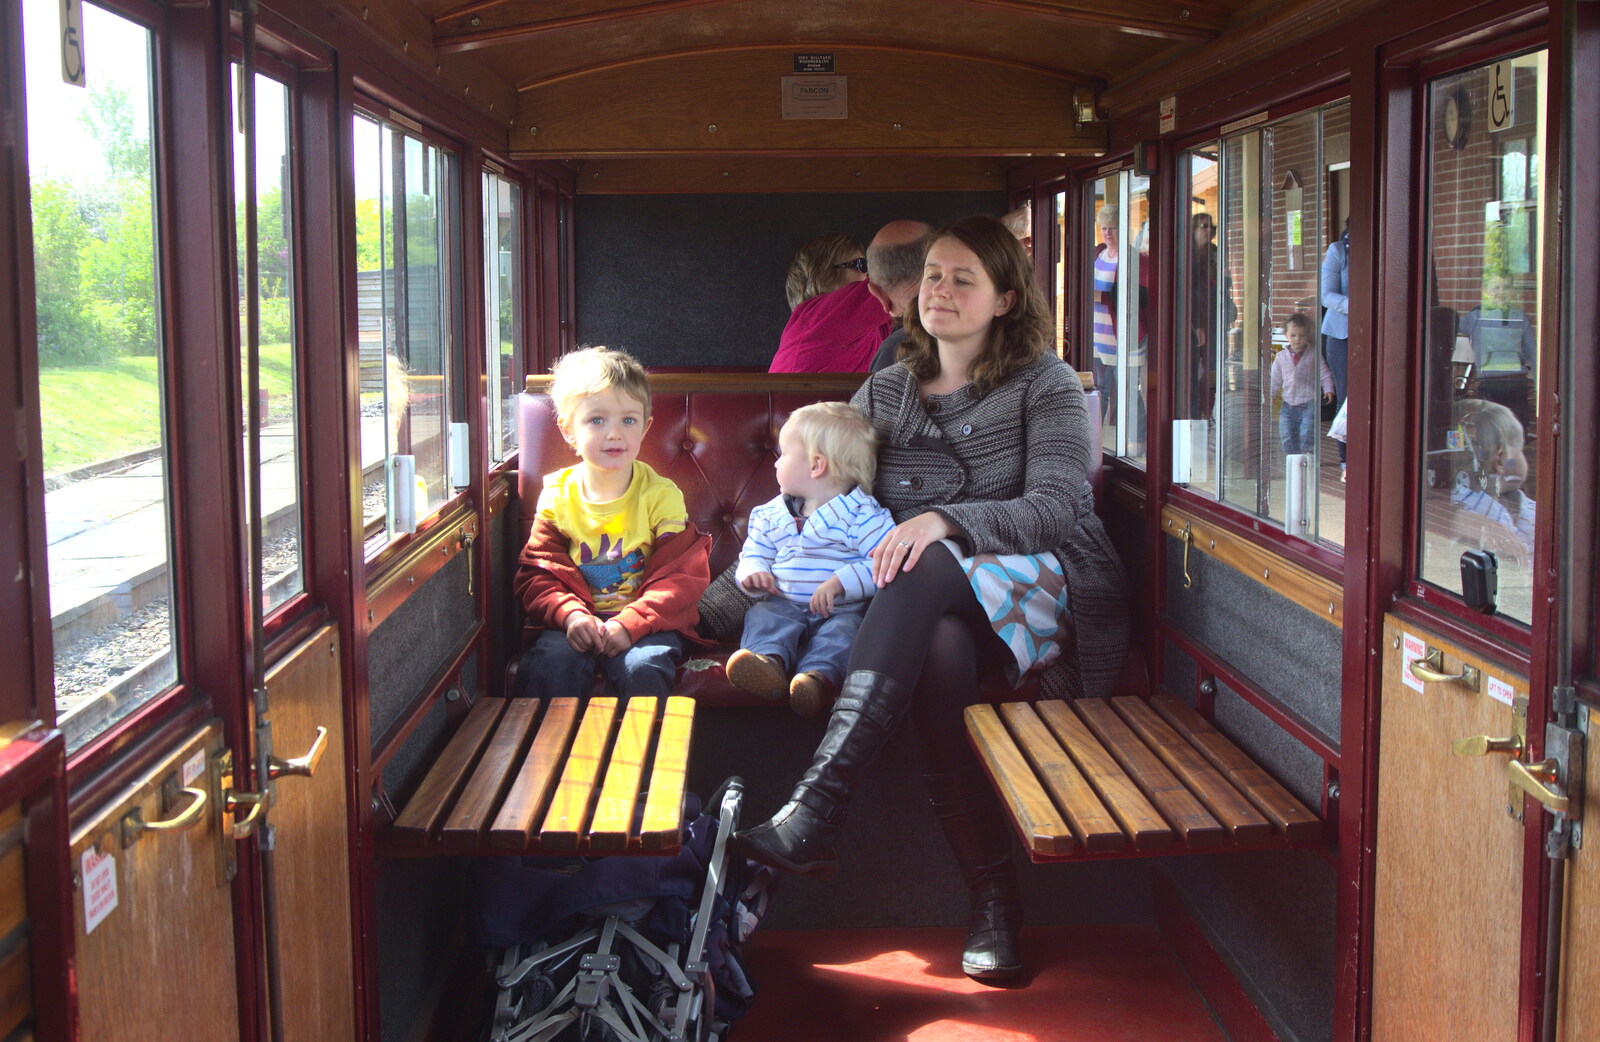 Fred, Harry and Isobel from The Bure Valley Railway, Aylsham, Norfolk - 26th May 2013